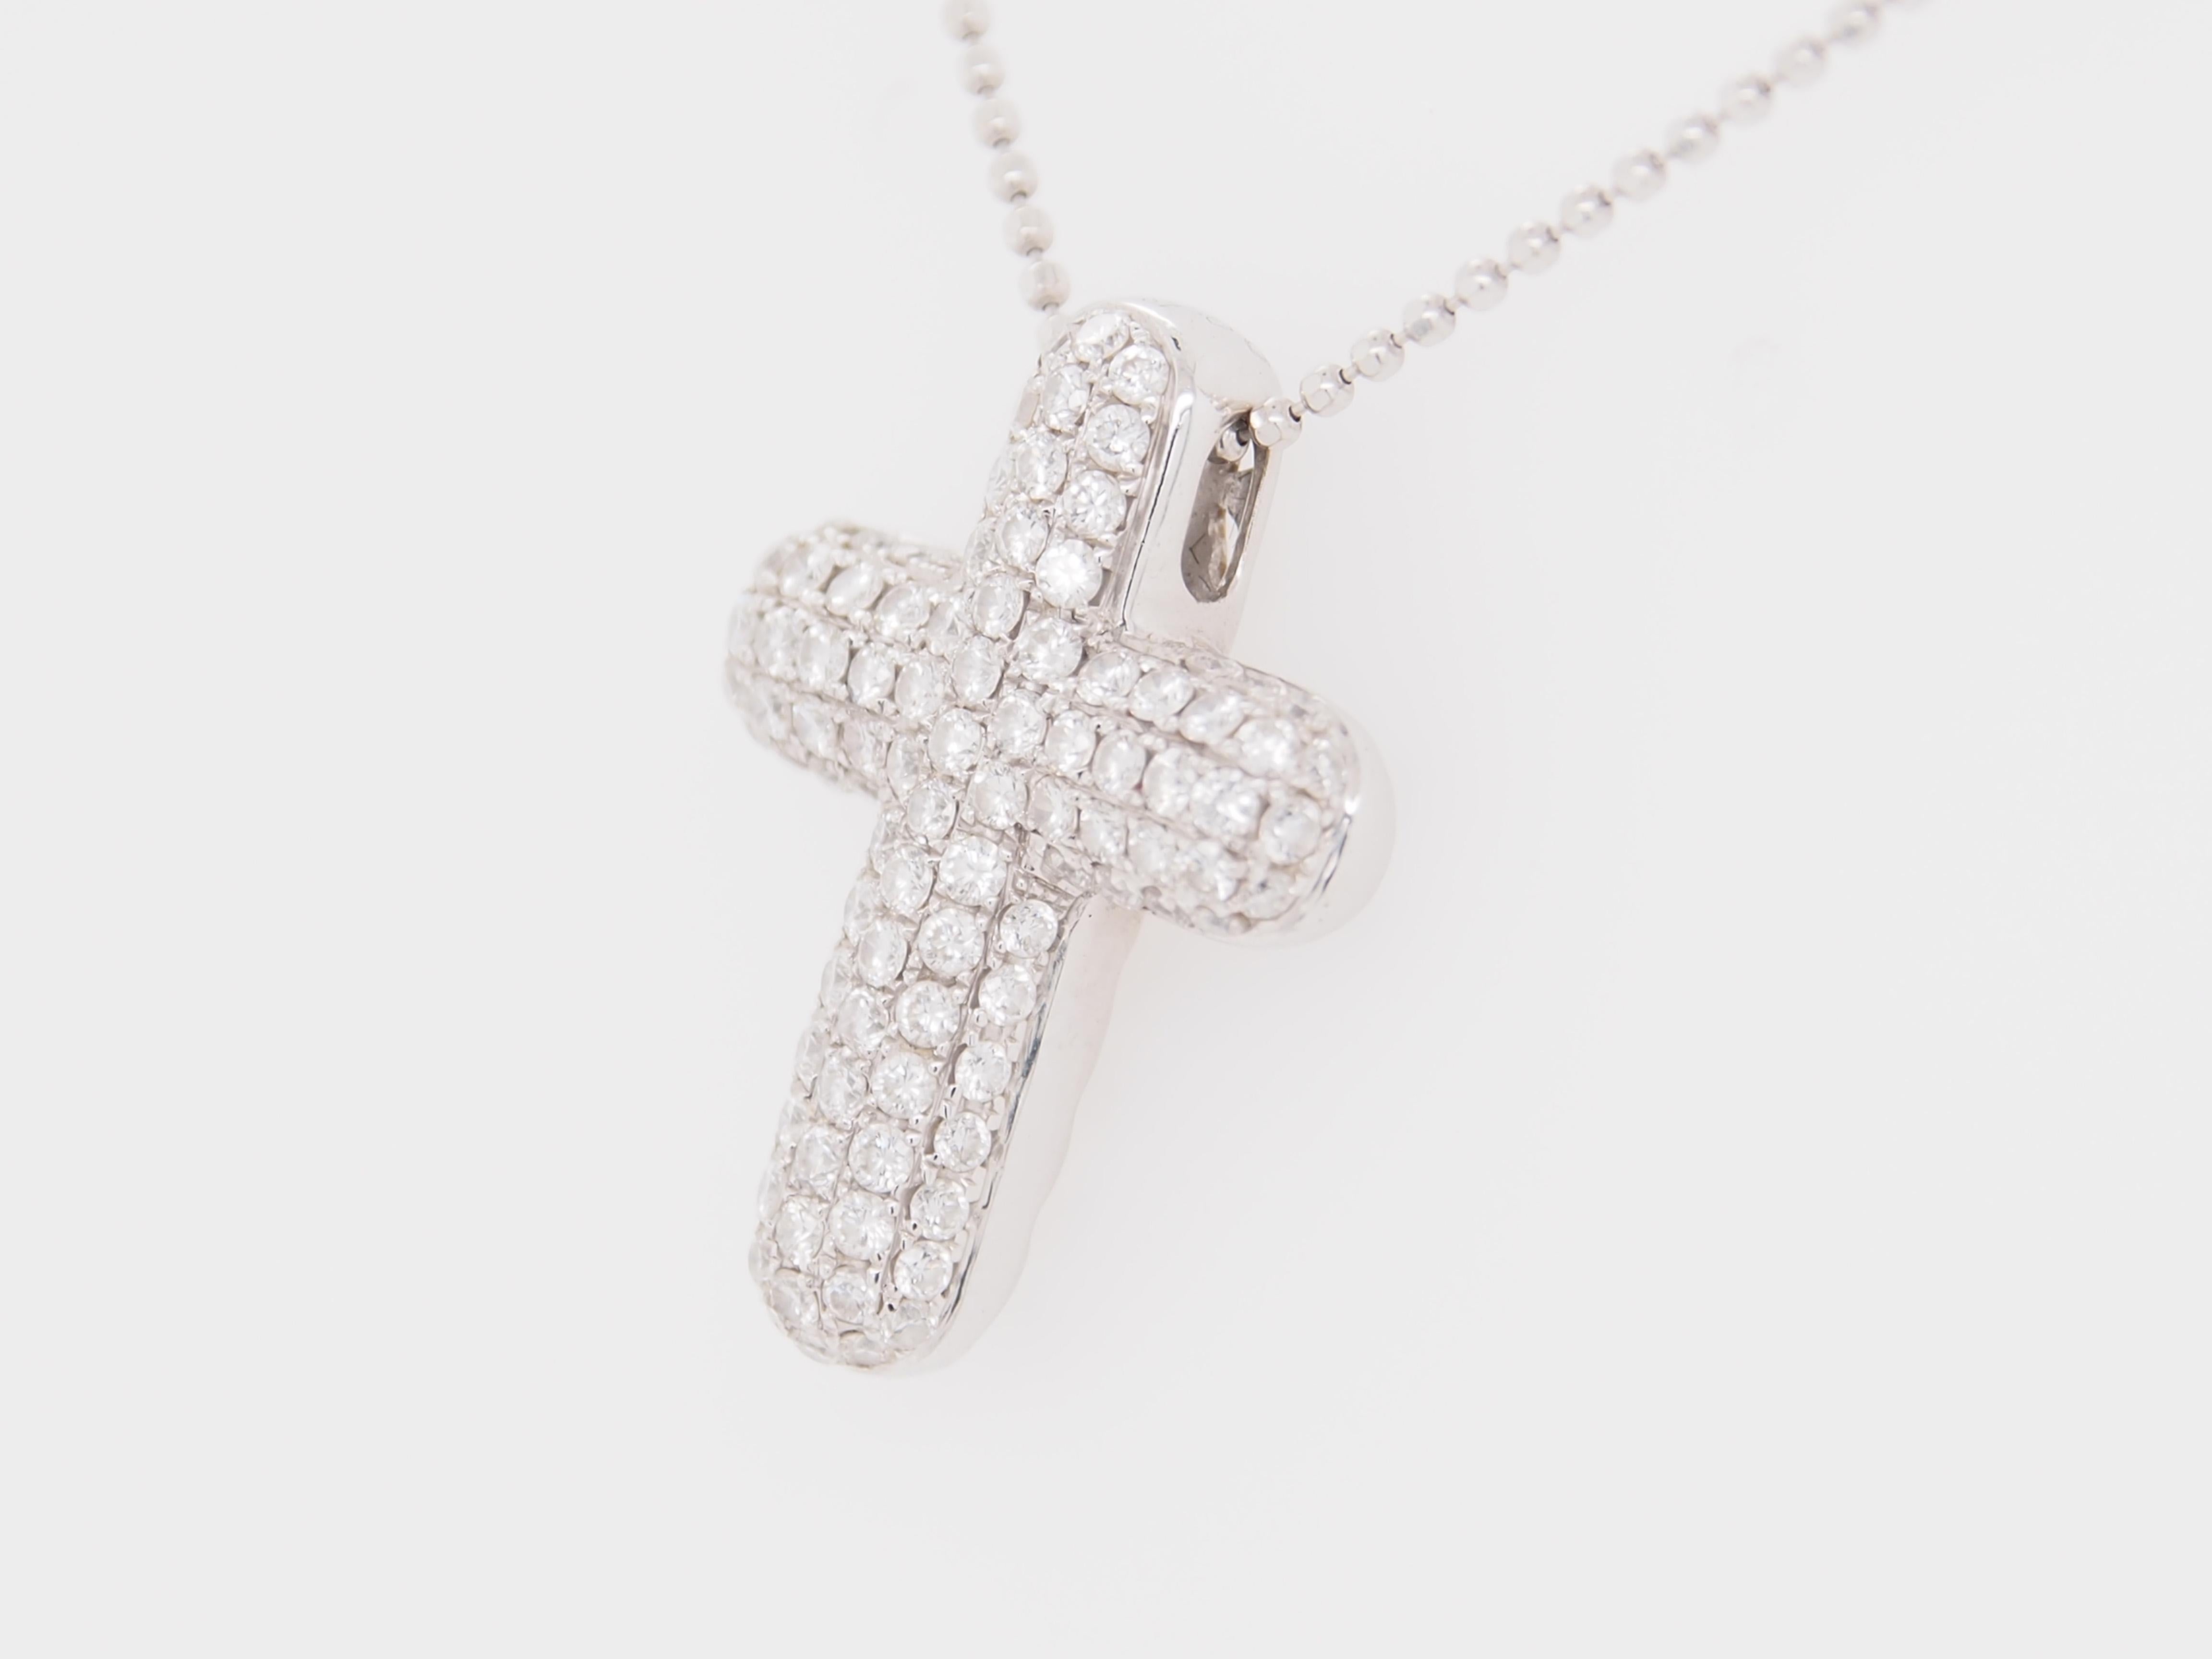 This is a delightful 18K White Gold Necklace with a Puffy 3/4 inch Cross sparkling with approximately 0.75ctw Round Brilliant Cut Diamonds, G-H in Color, VS in Clarity. The Charm is signed 